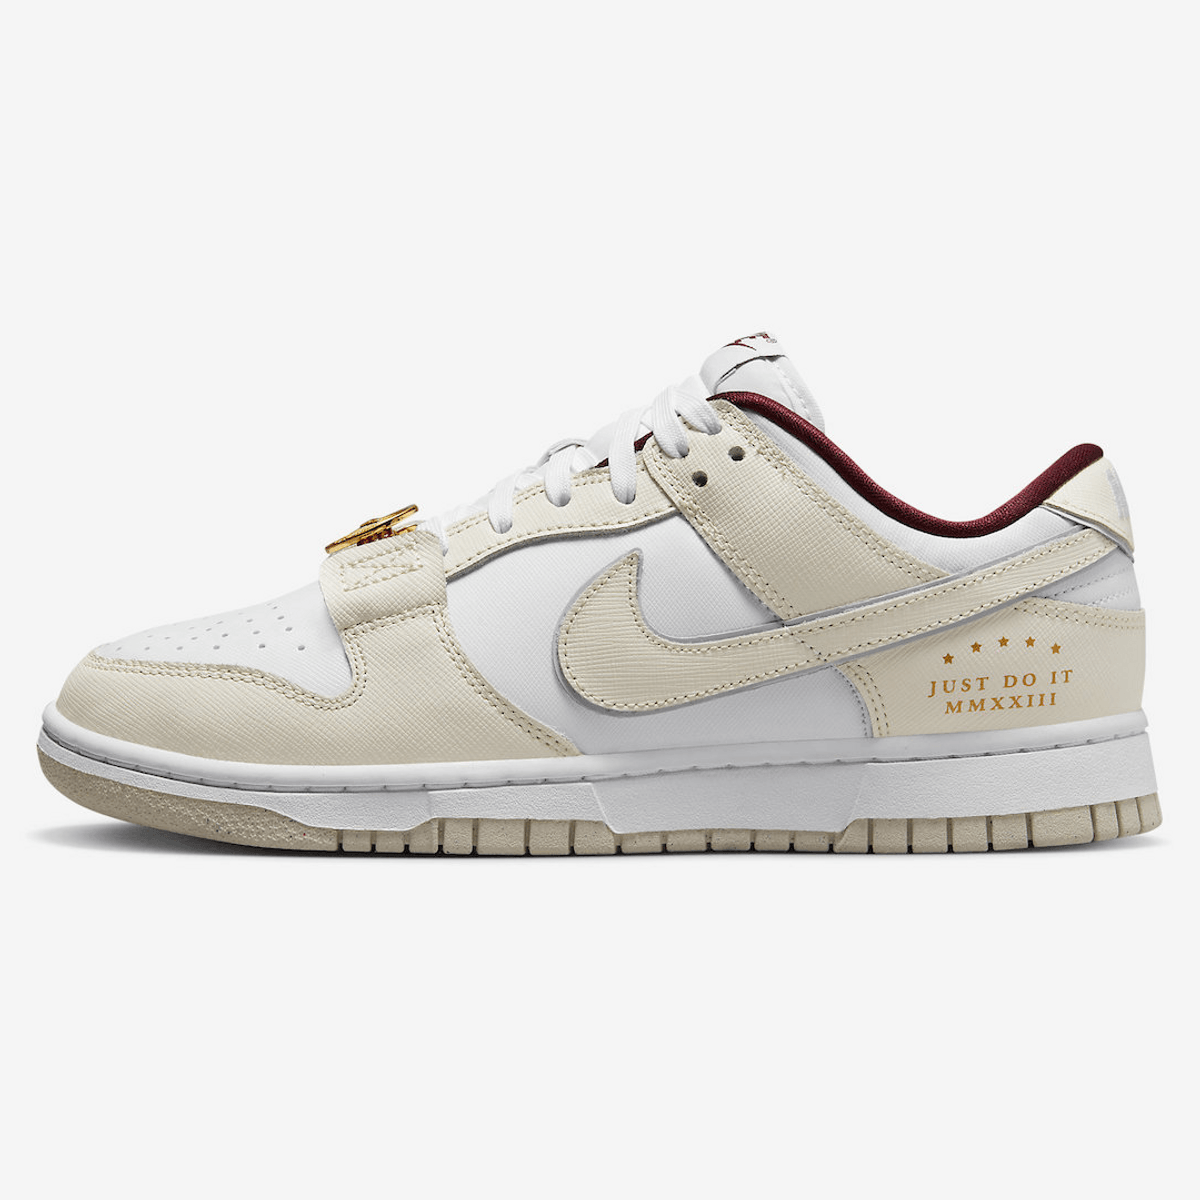 Nike Dunk Low WMNS Just Do It Releasing February